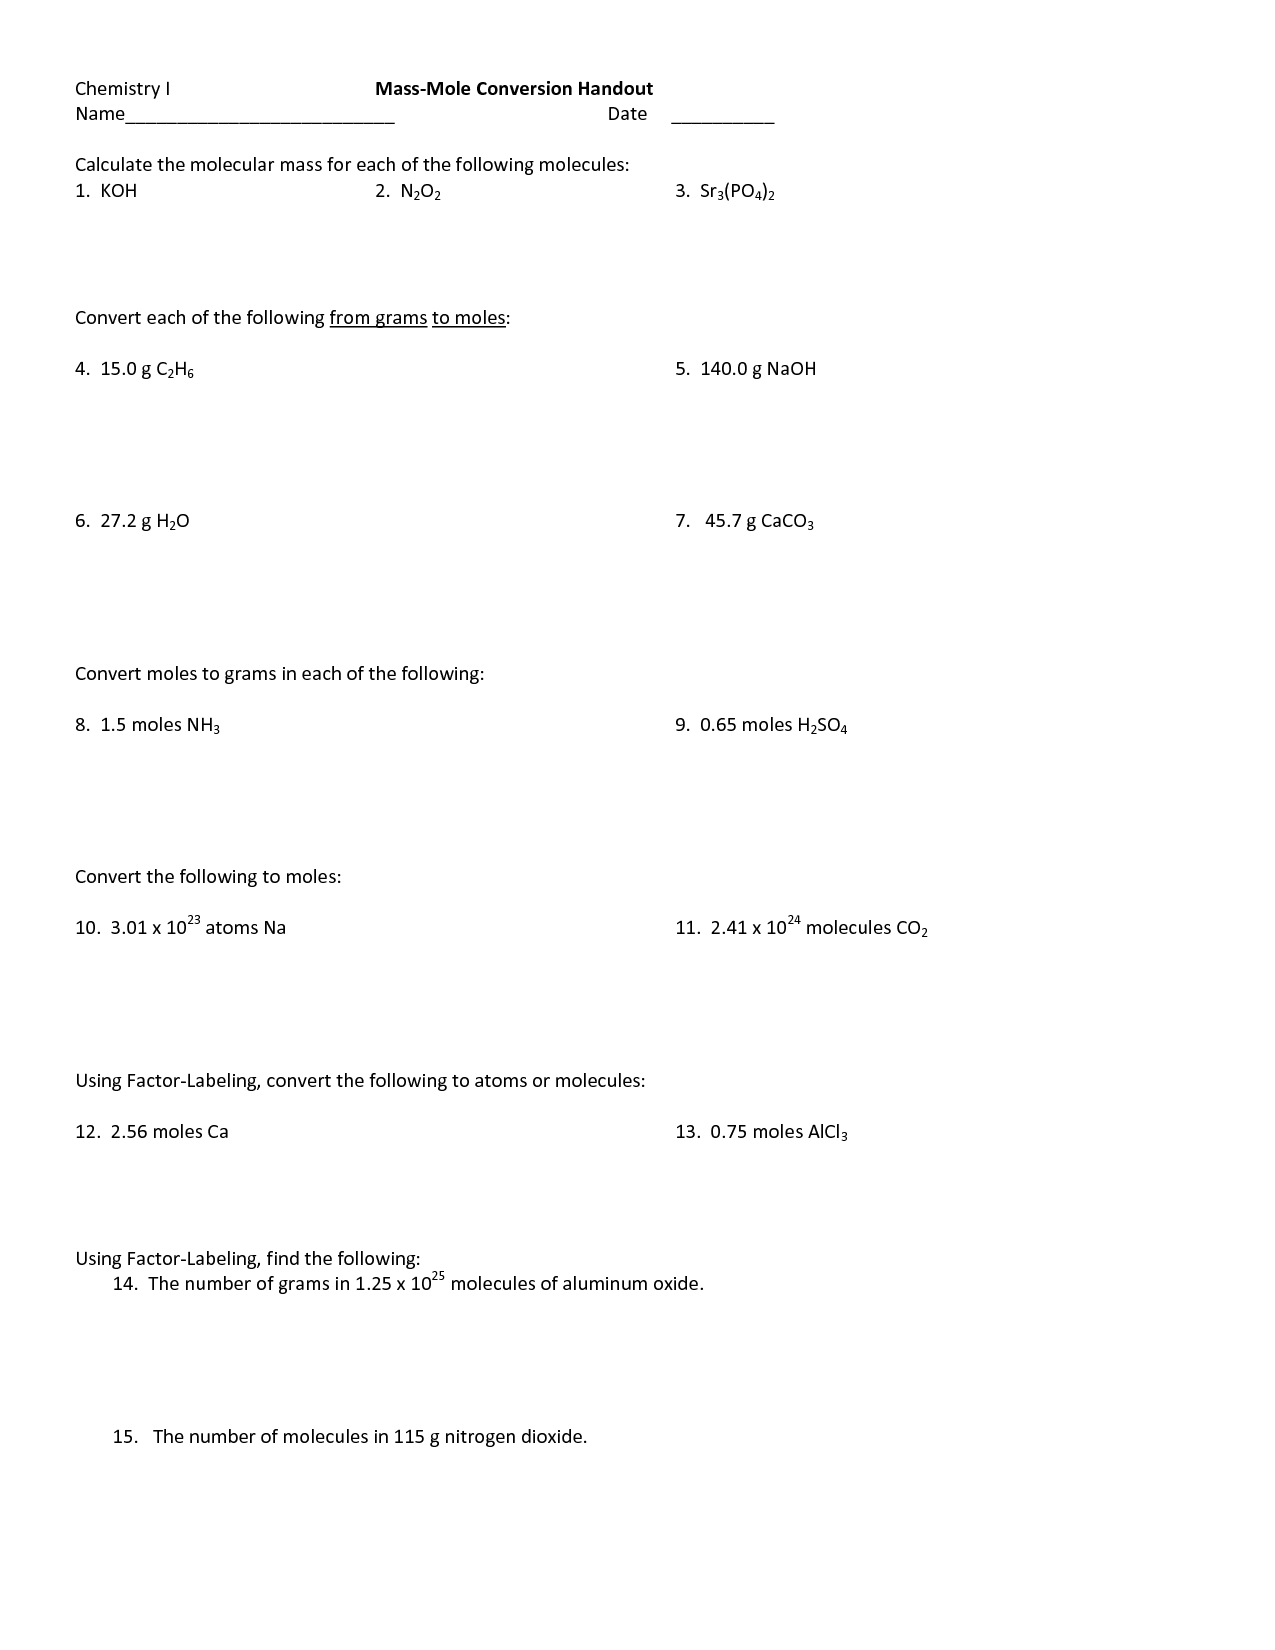 10-best-images-of-moles-and-mass-worksheet-answers-moles-and-molar-mass-worksheet-mole